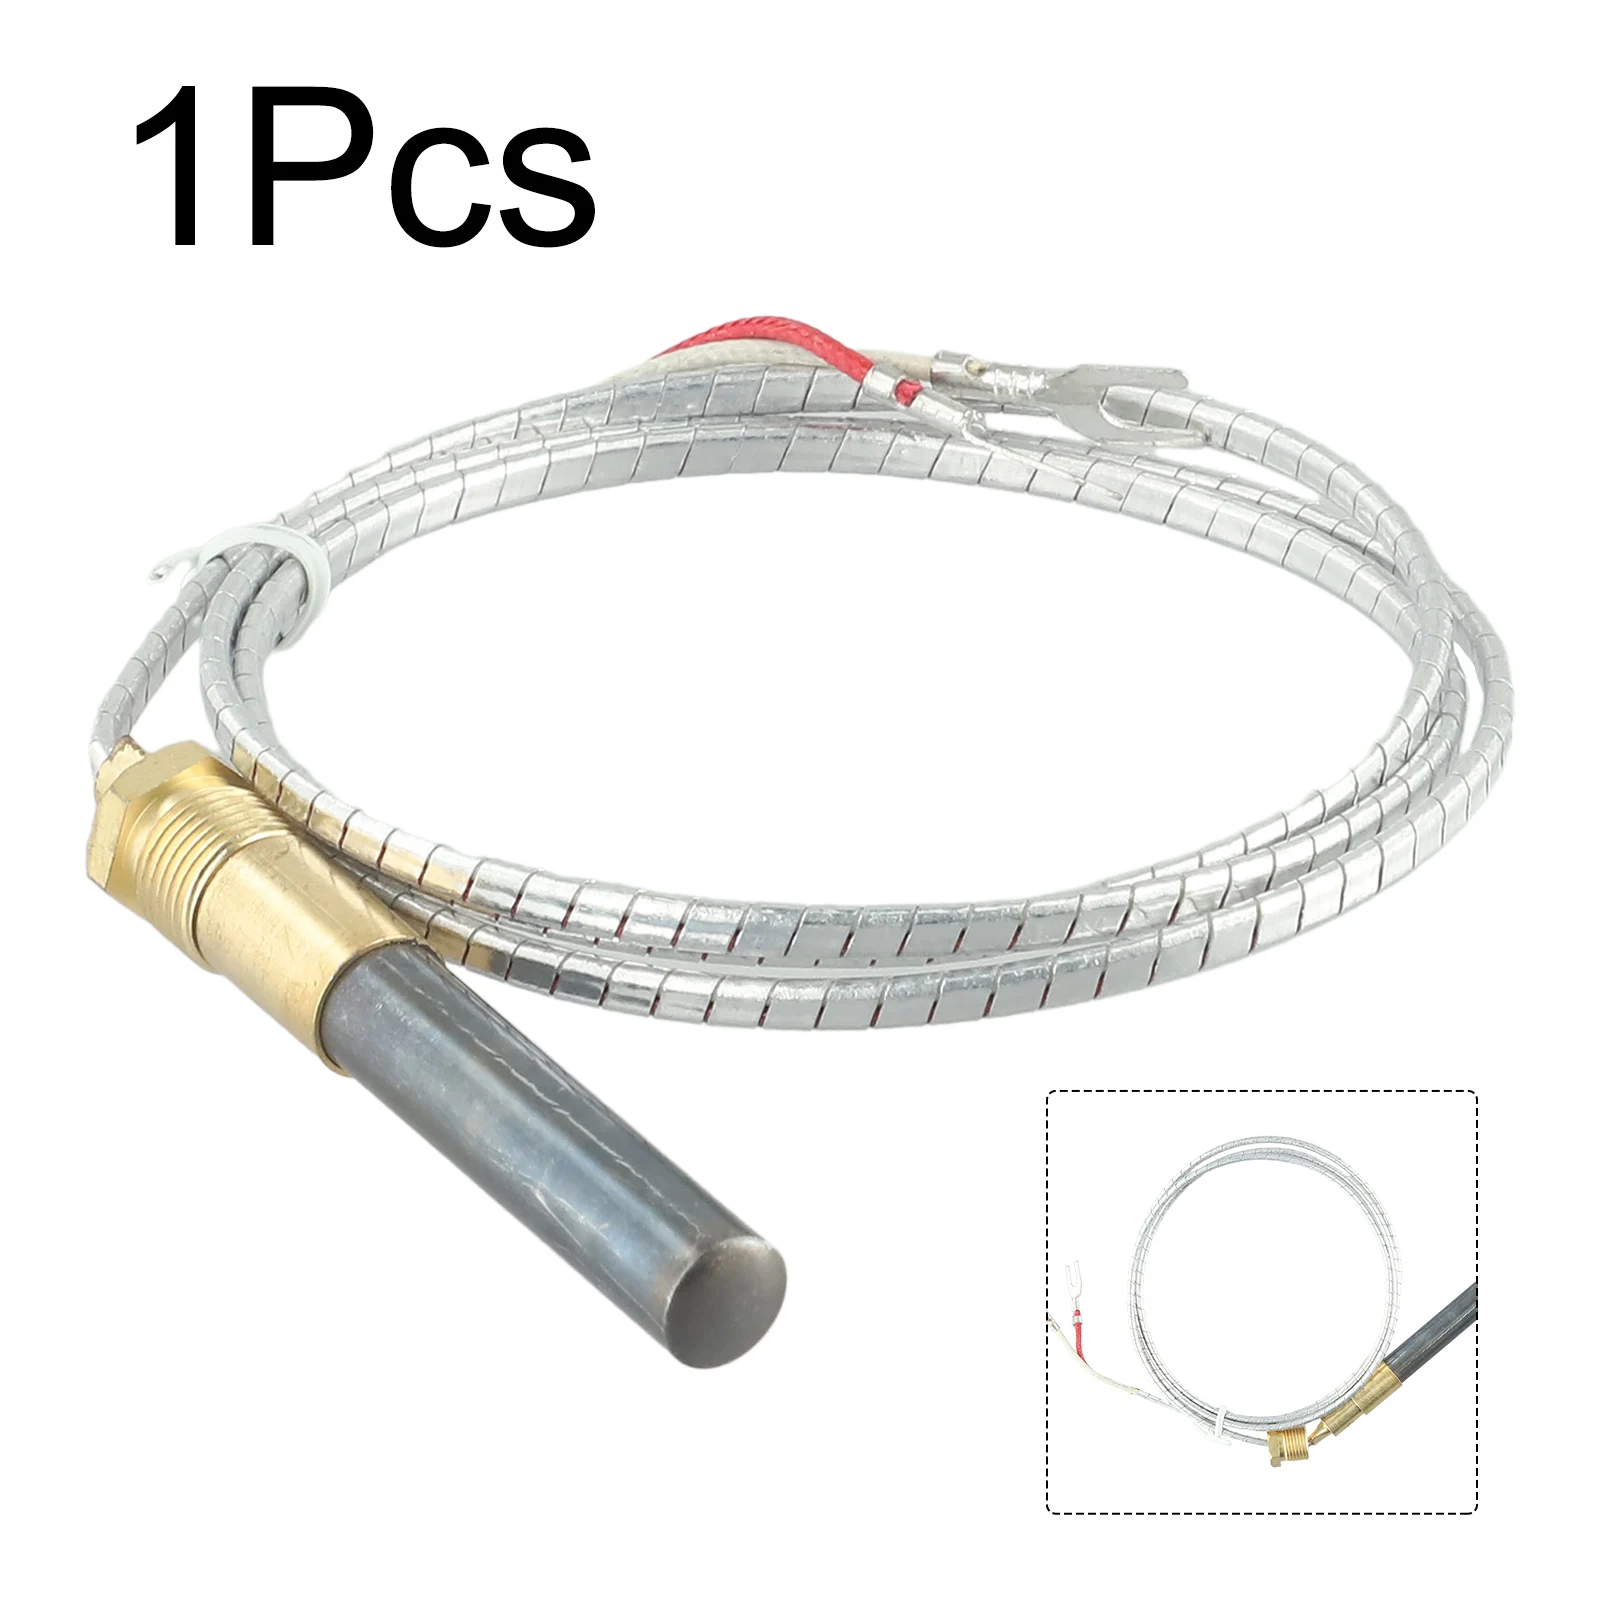 

Thermocouple Thermopile Thermopile Fireplaces Gas Fireplace Heater Temperature Hot Water Heater Pilot Generator New Practical